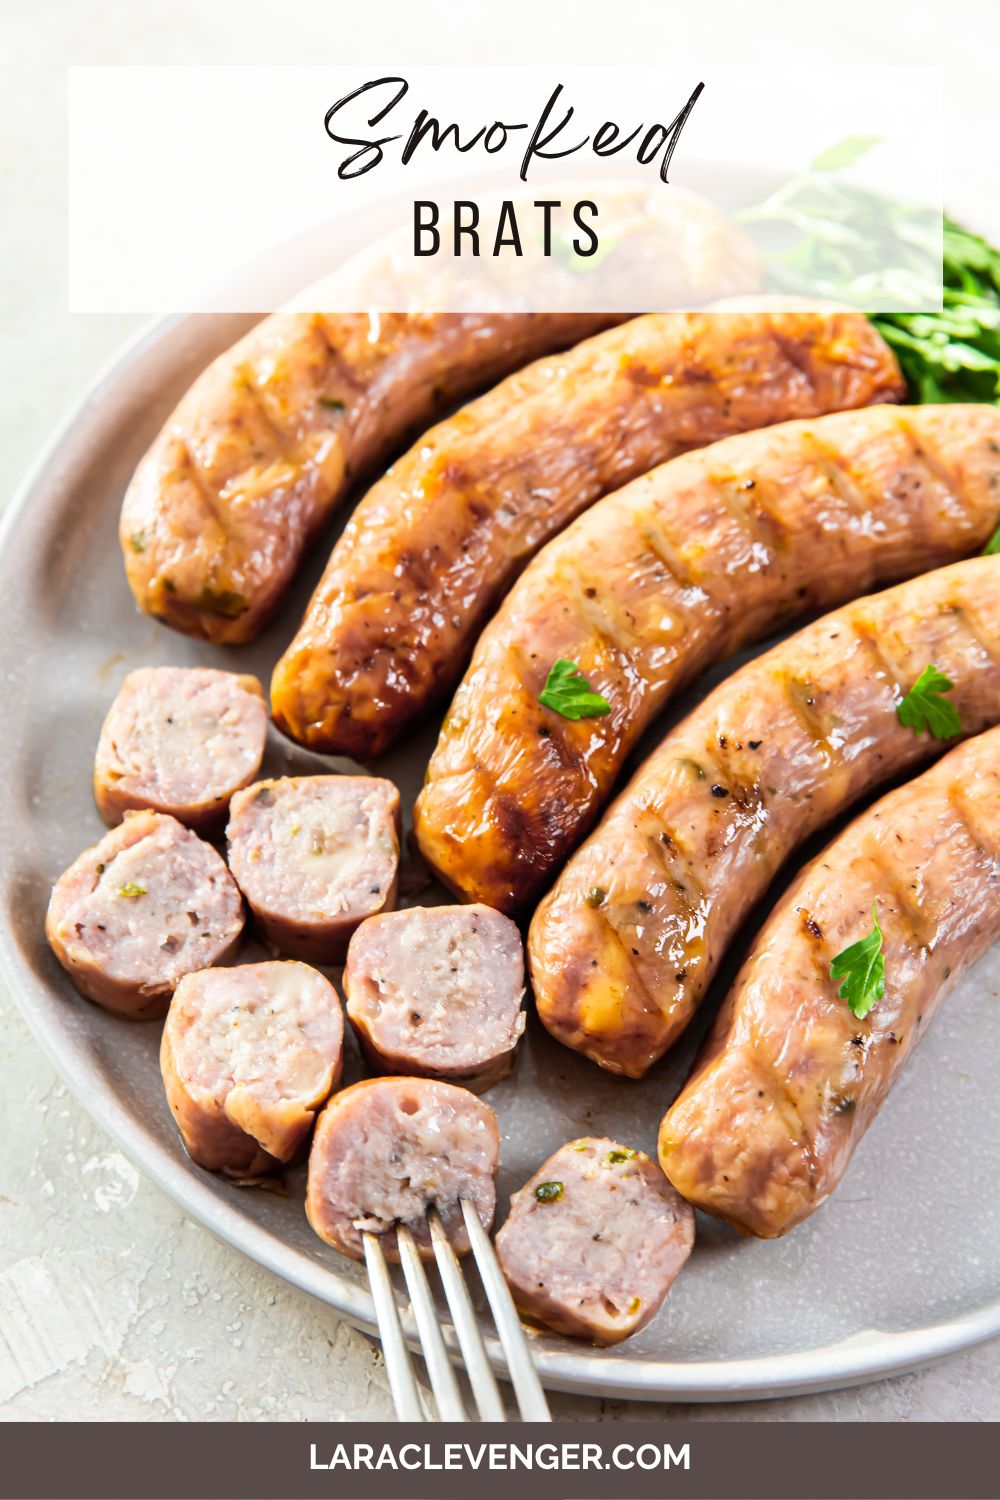 pin of smoked brats on a white plate with a fork